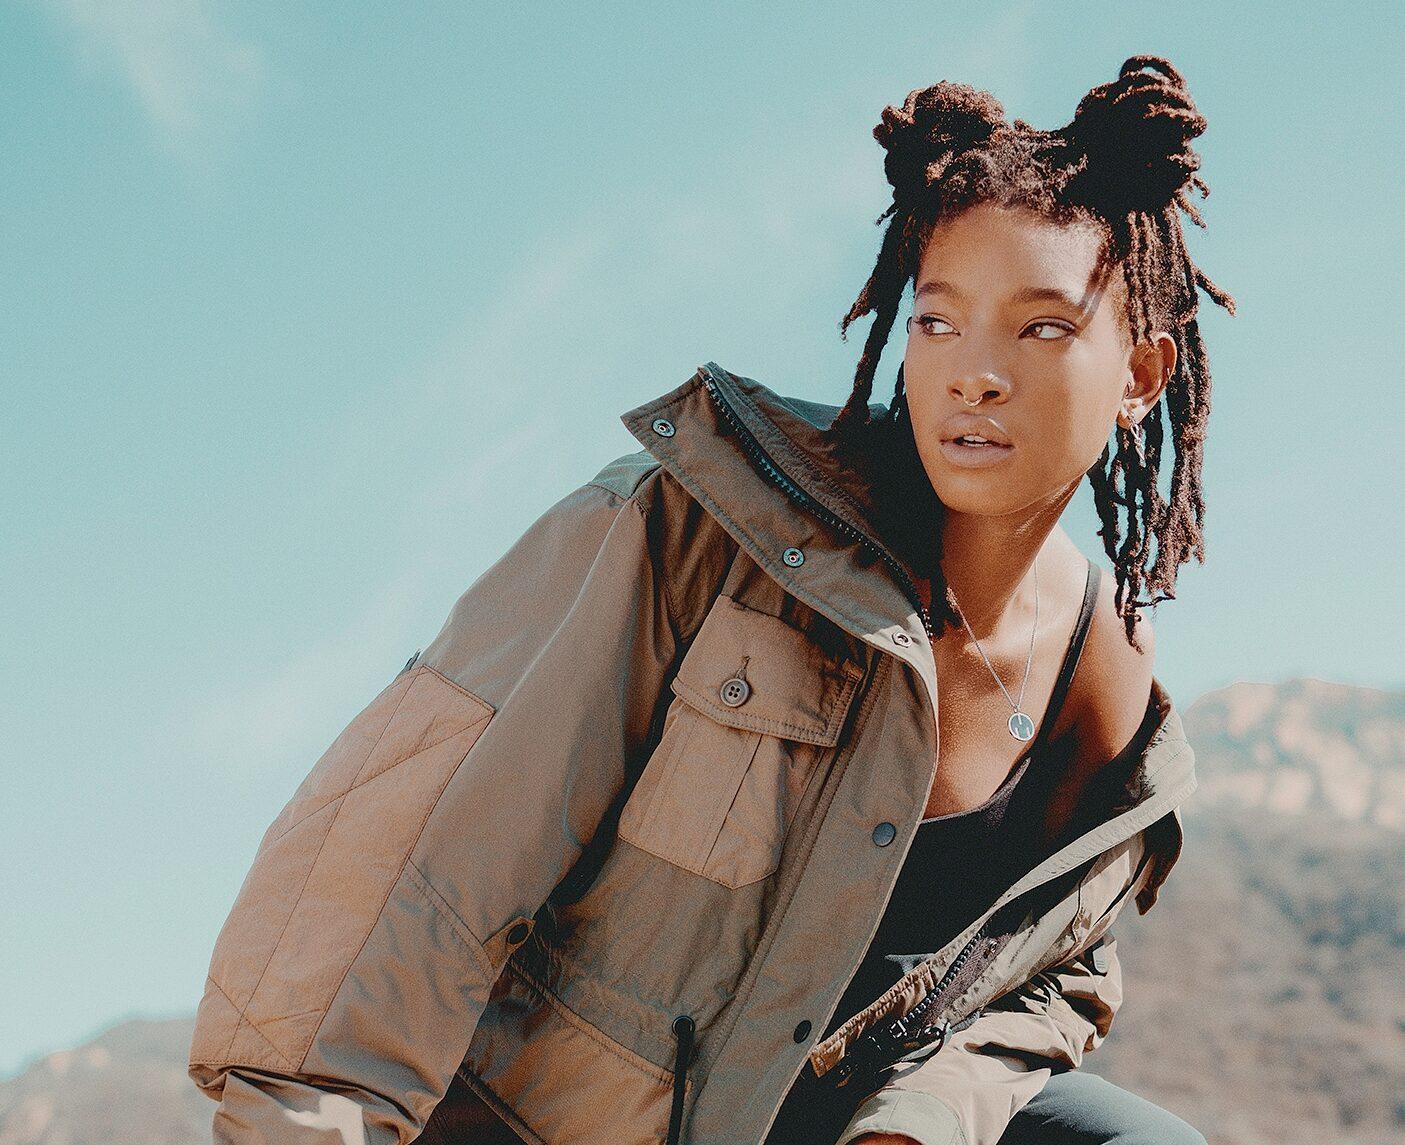 Willow Smith models for Onitsuka Tiger